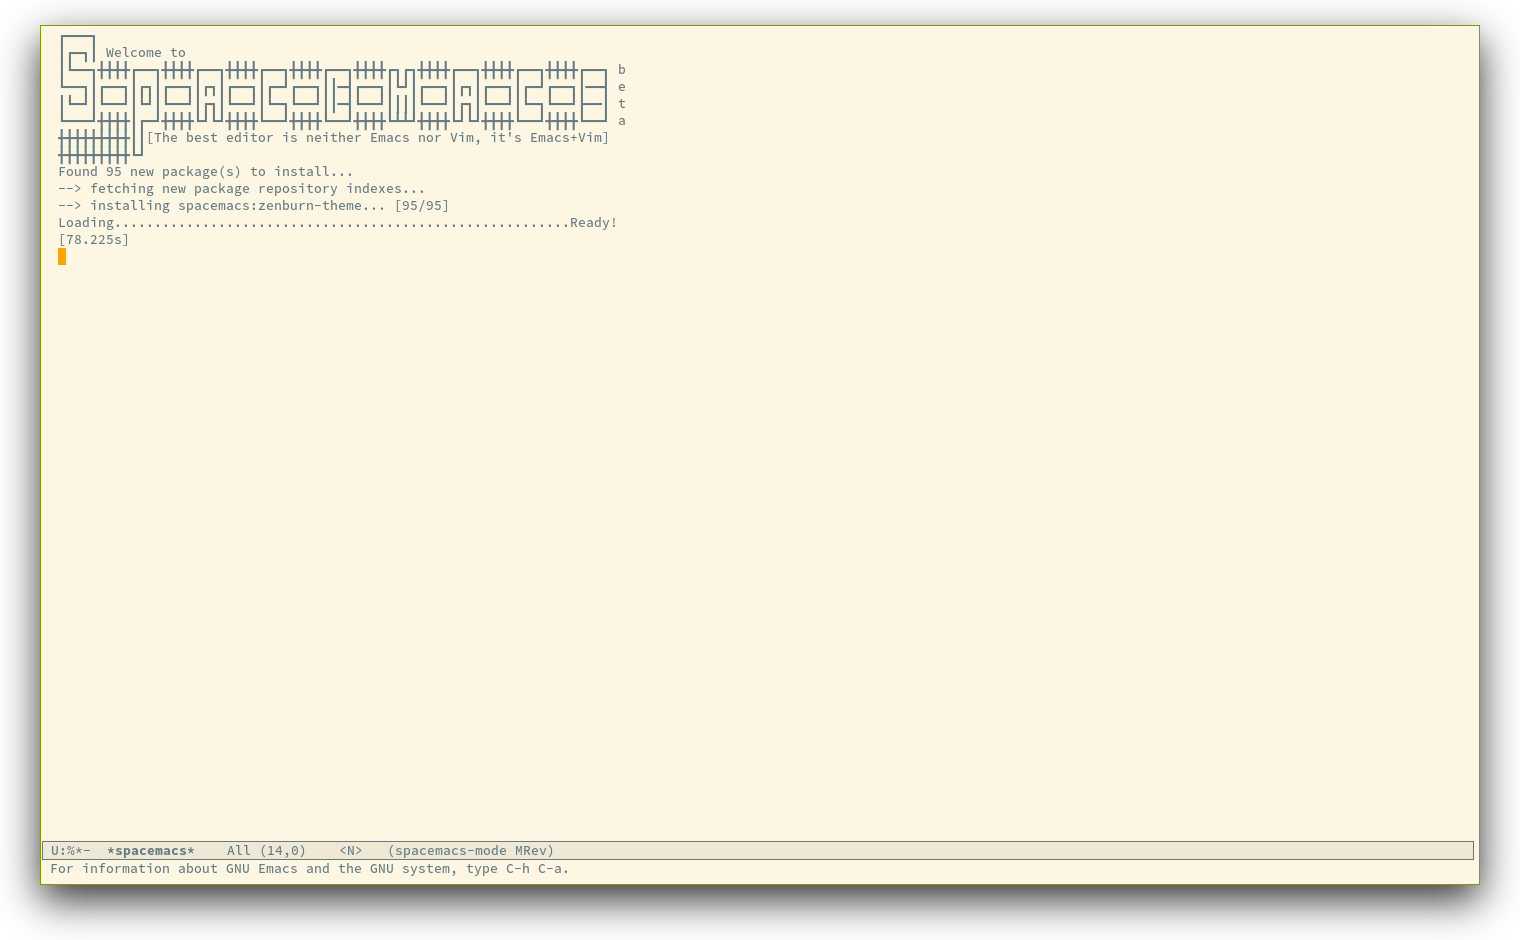 /TakeV/spacemacs/media/commit/5b94e3ab8ade2b50cf25a08251ae3228328e879a/doc/img/spacemacs-startup.png